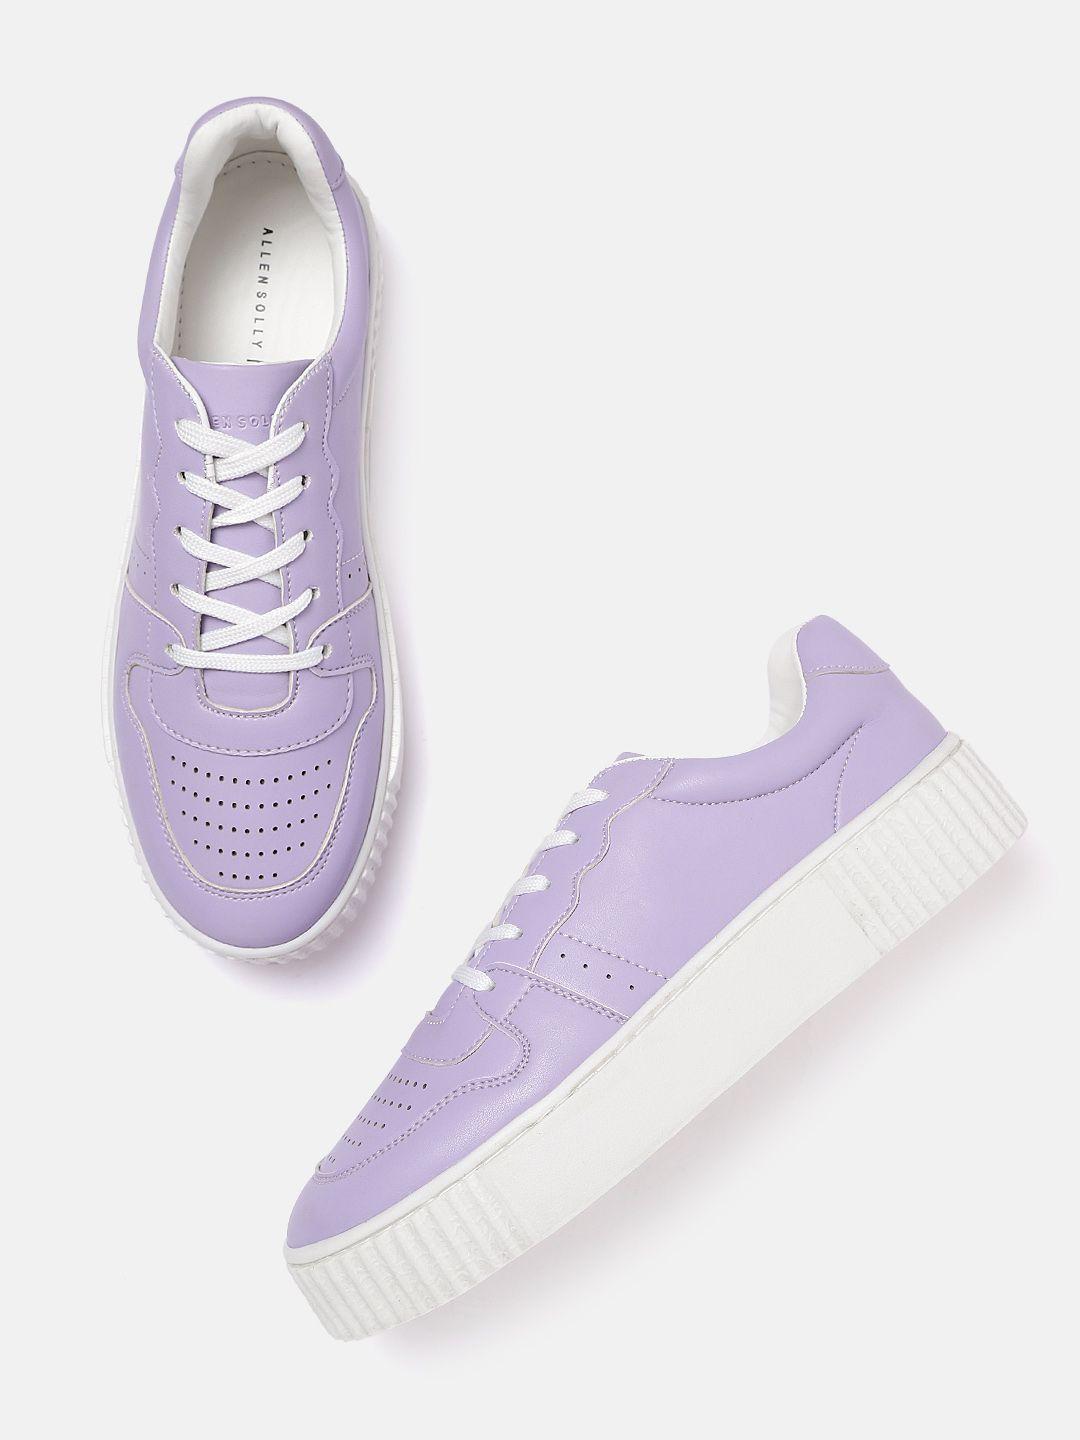 allen solly women lavender perforated flatform sneakers